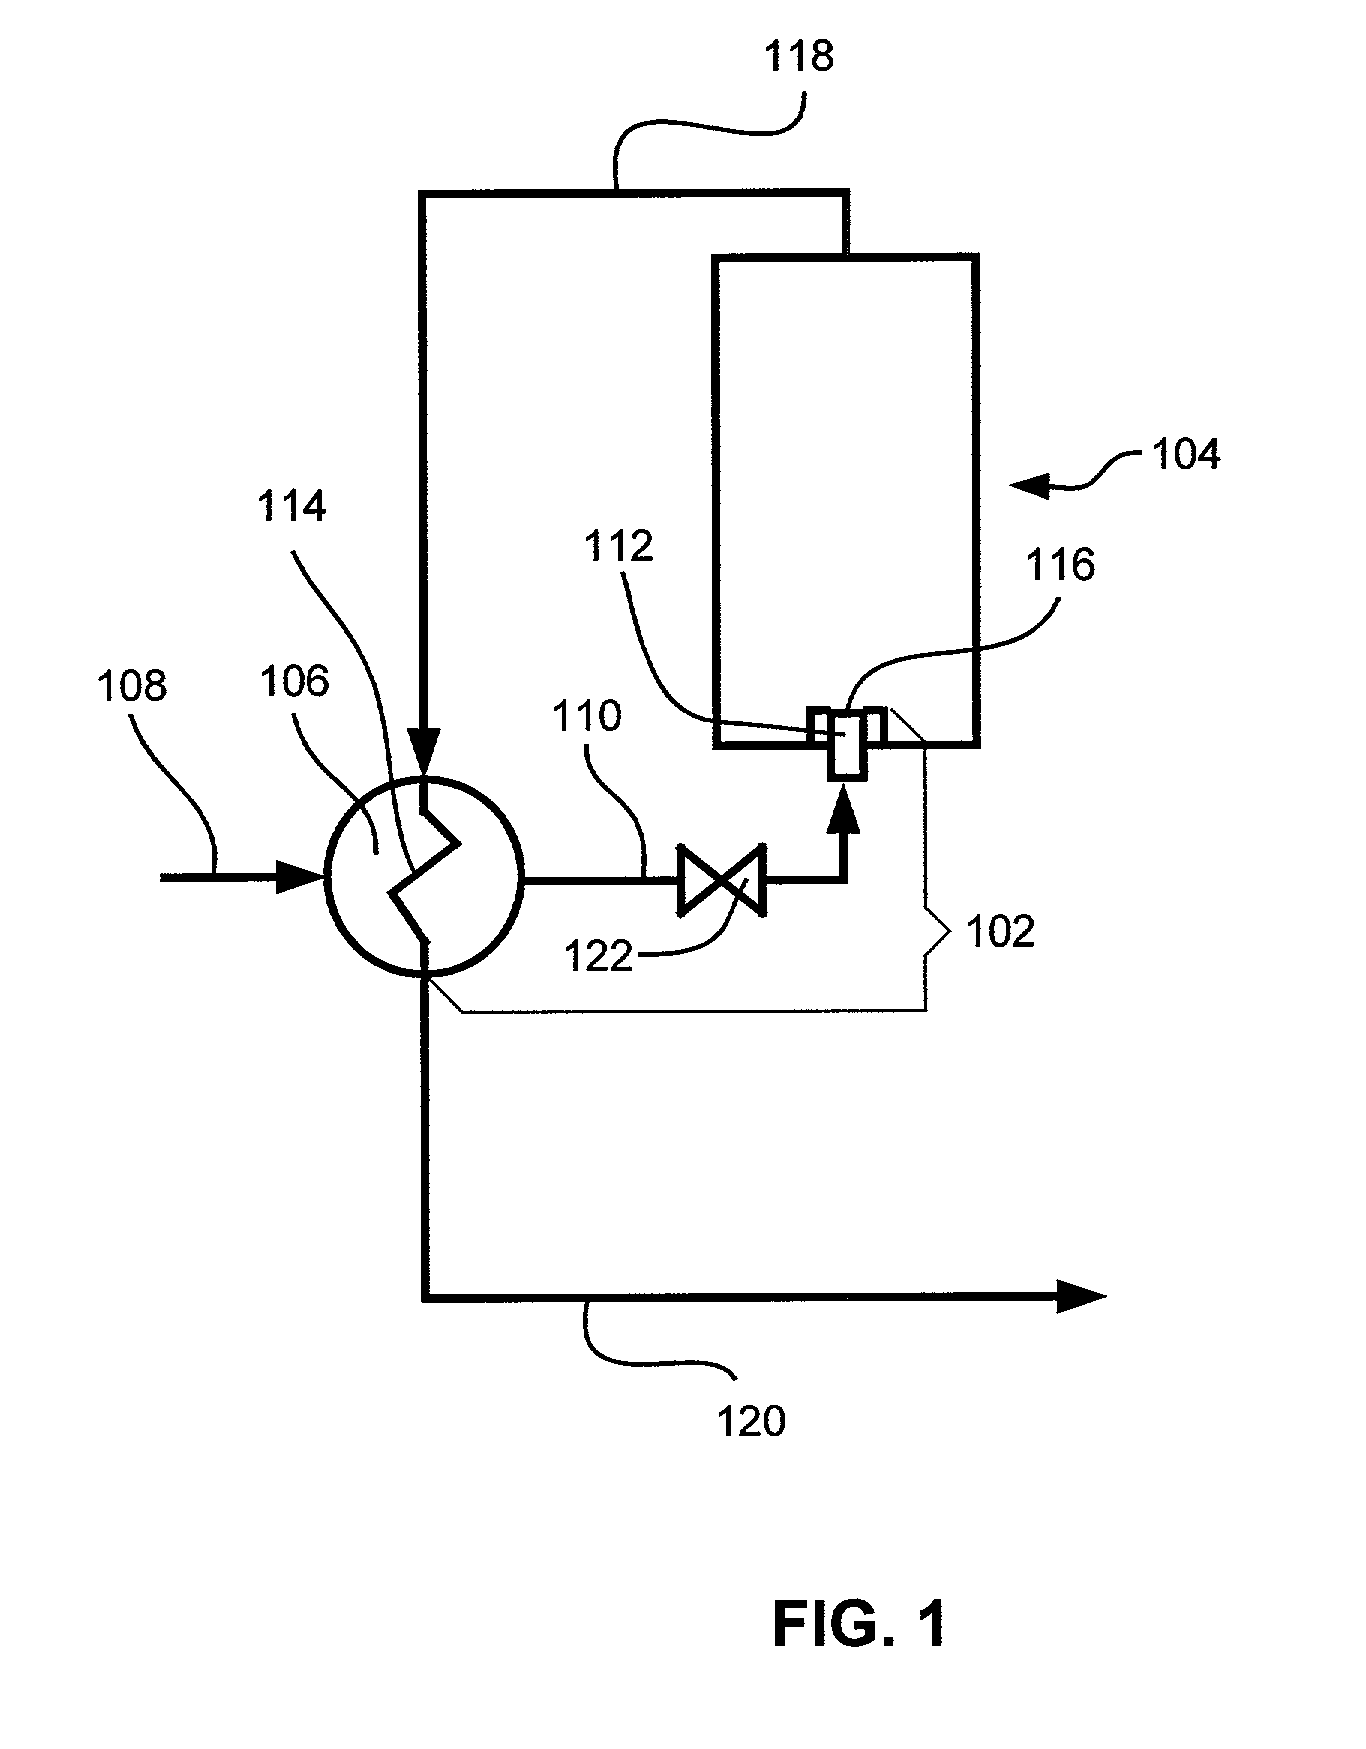 Method and apparatus for reducing decomposition byproducts in a methanol to olefin reactor system